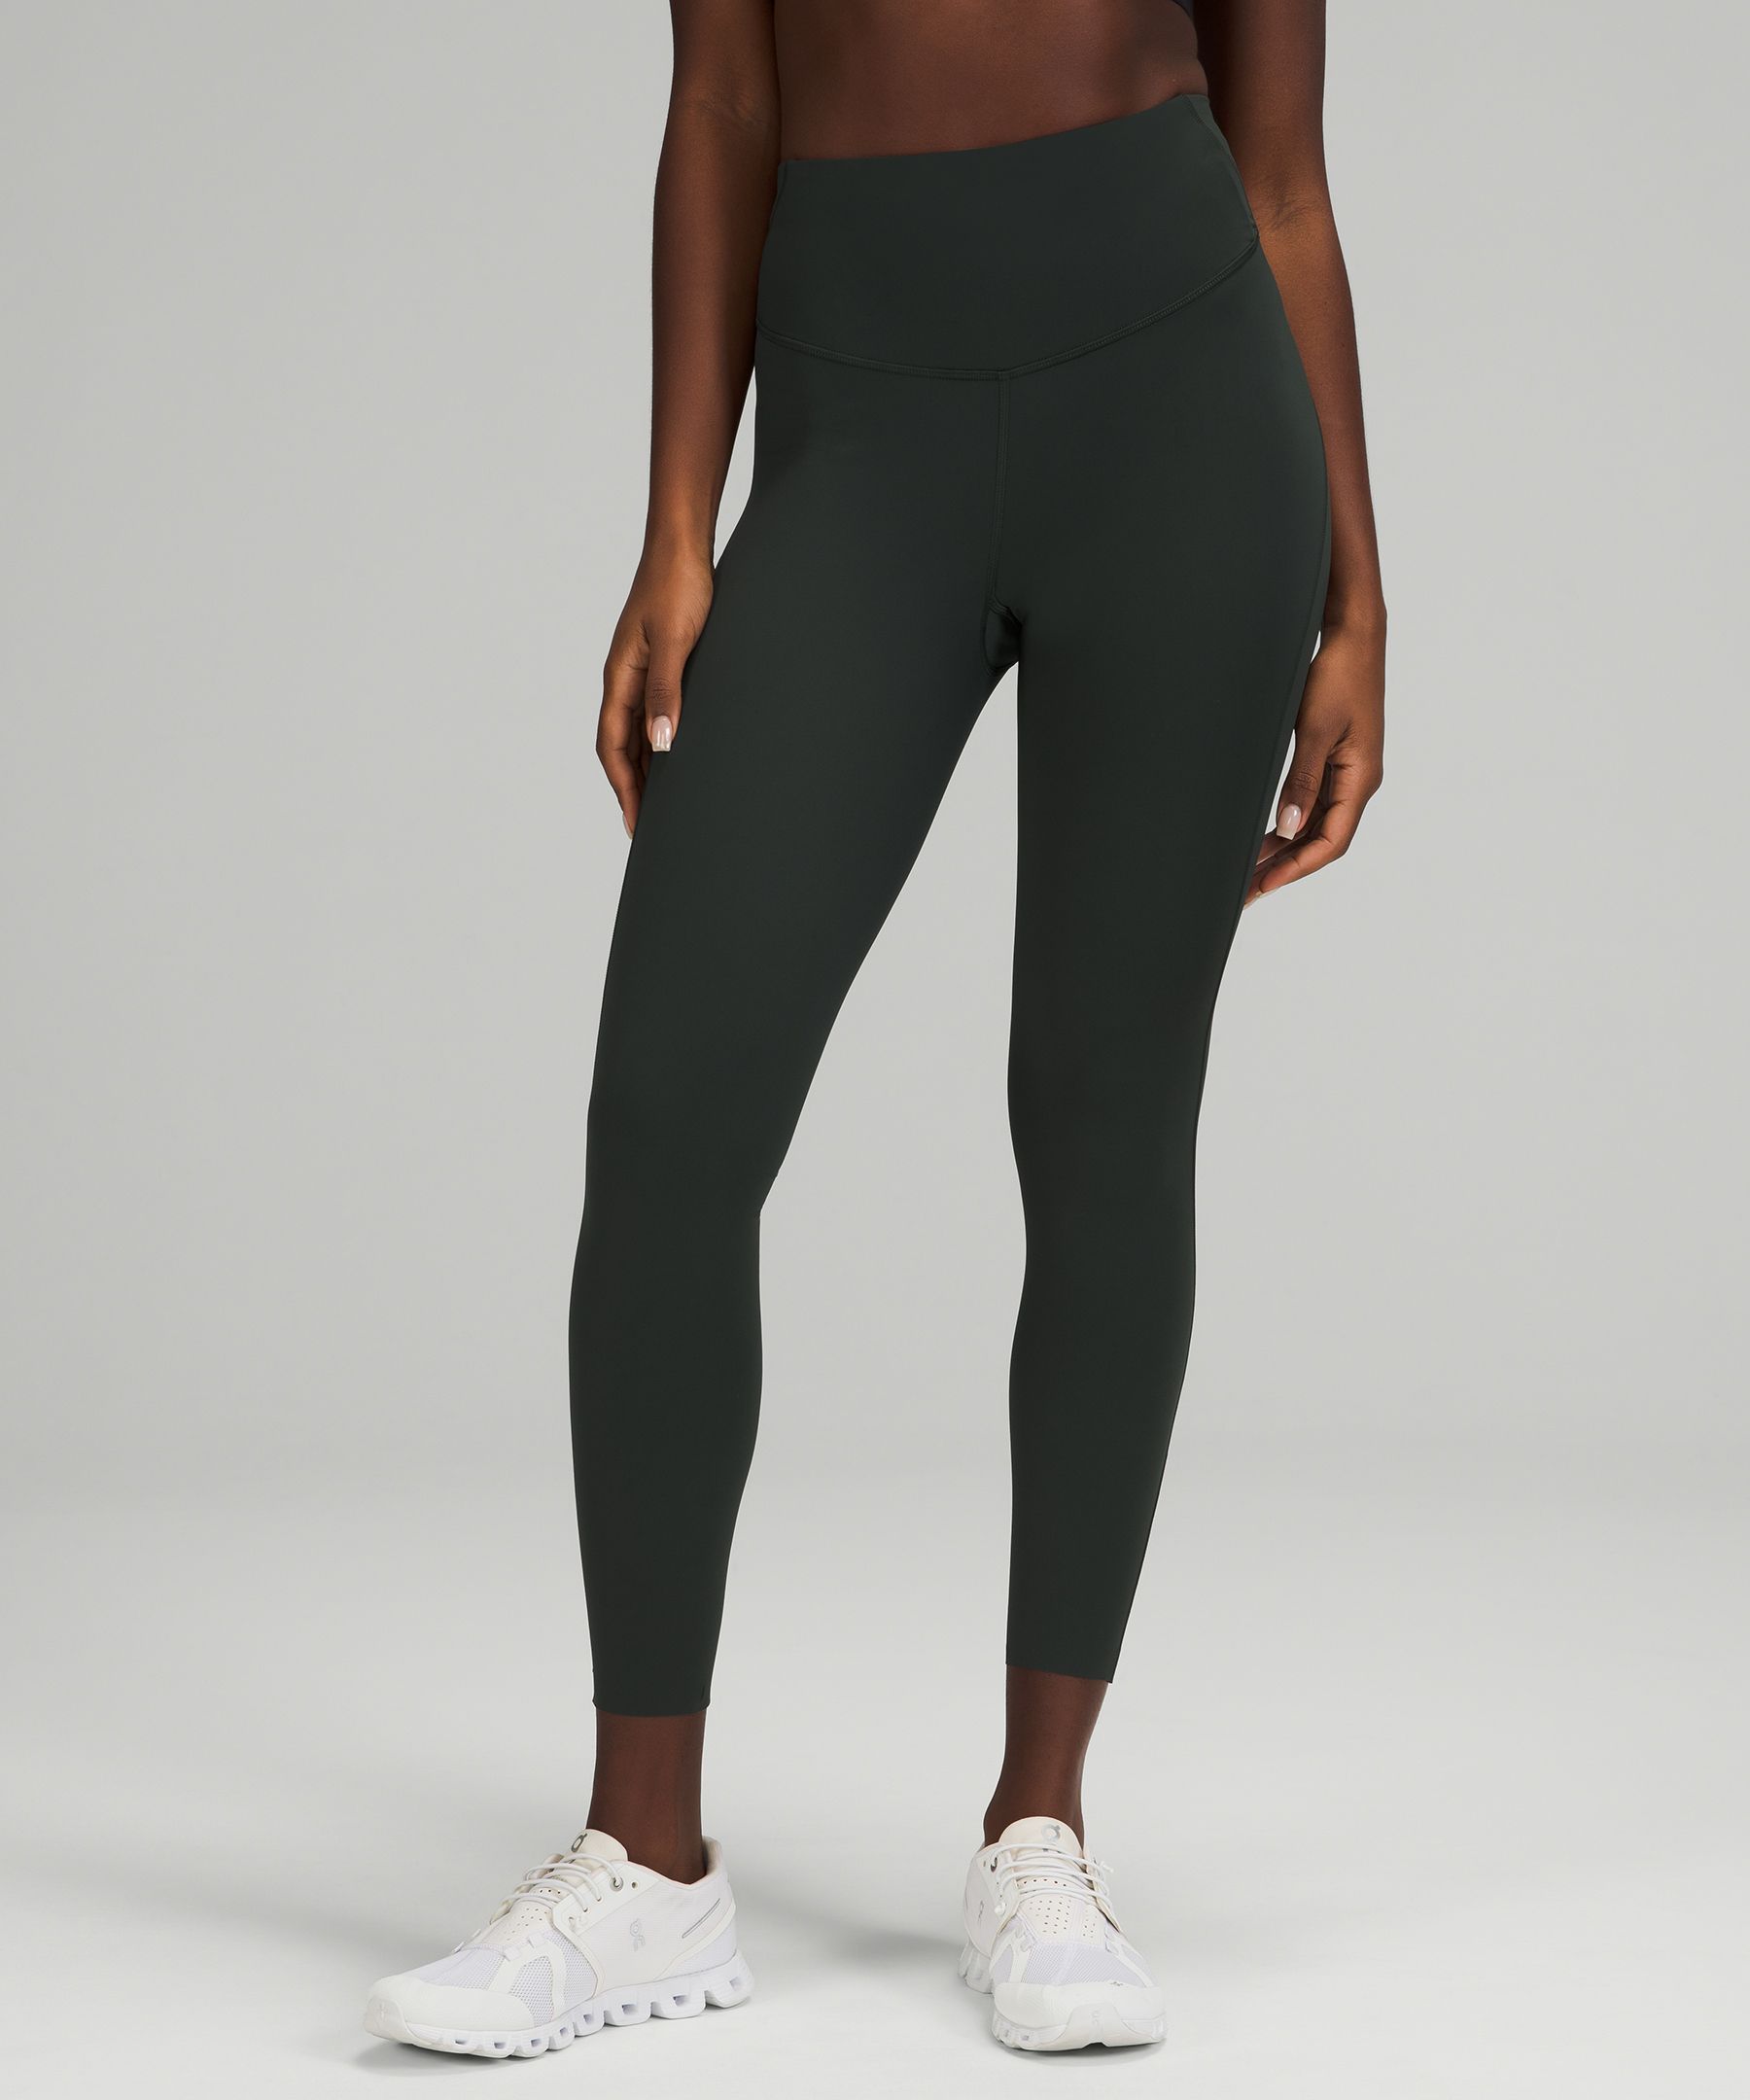 Lululemon Base Pace High-rise Running Tights 25" In Rainforest Green